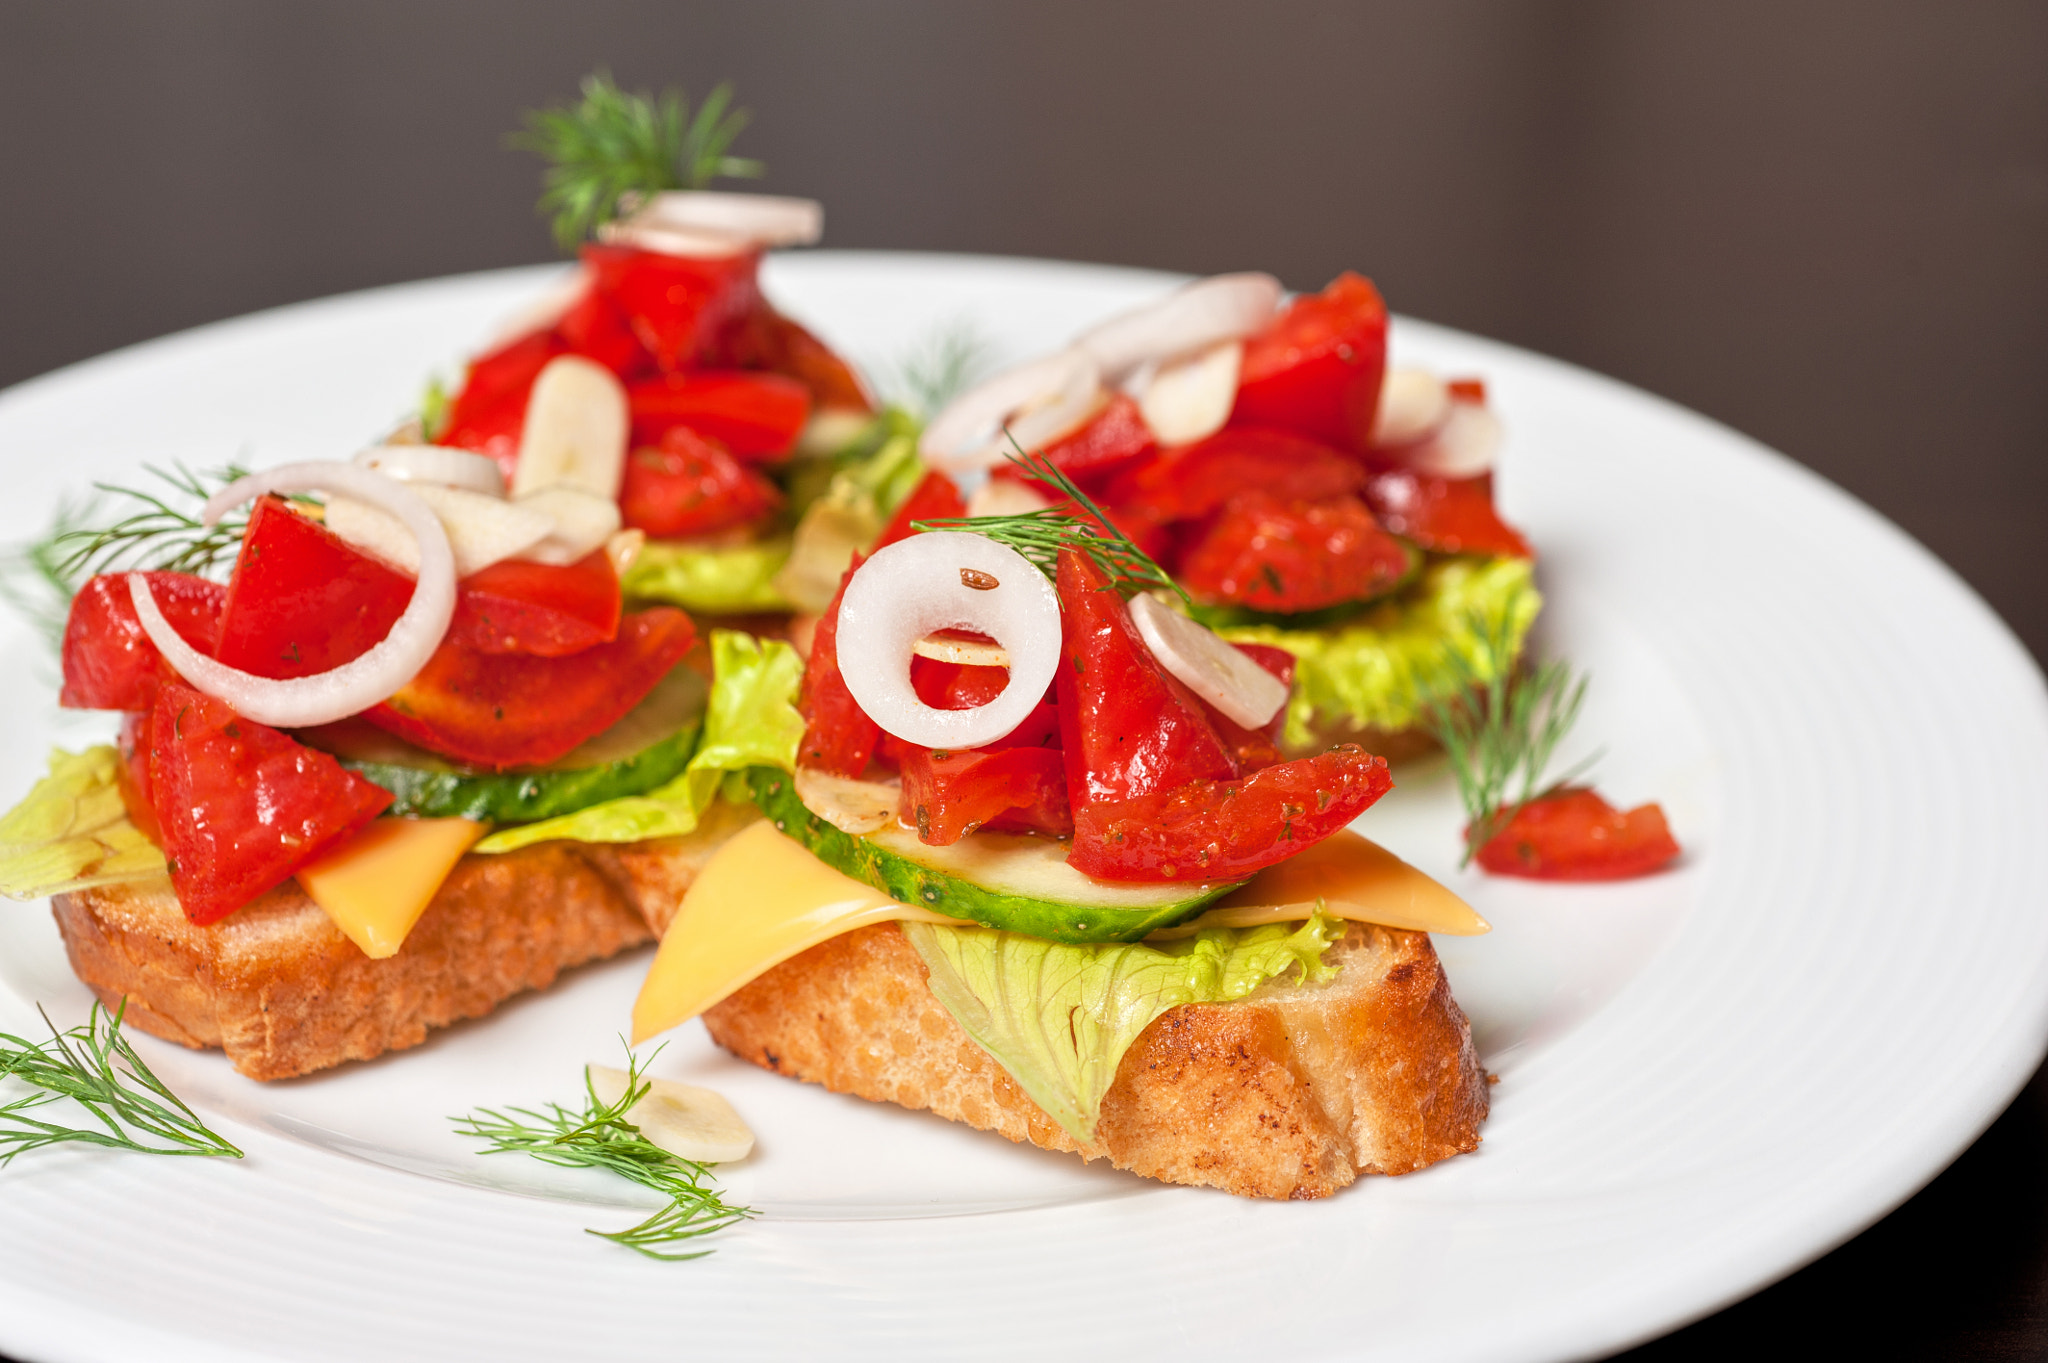 Nikon D700 sample photo. Toast with vegetables photography